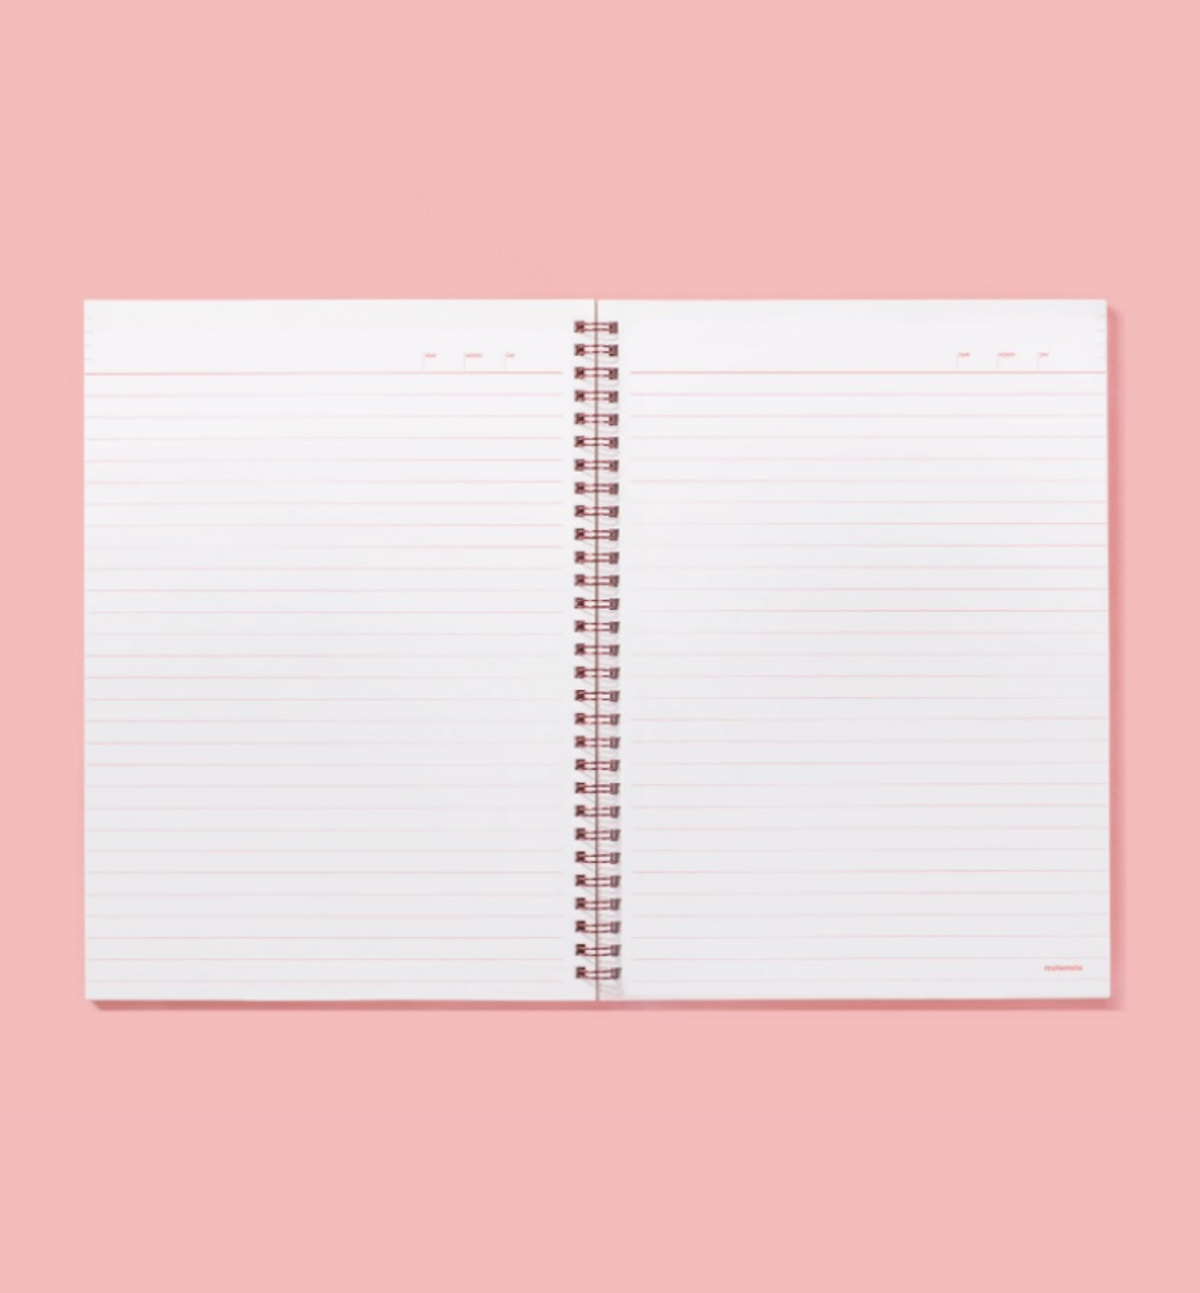 Spring Ruled Notebook [Coral]